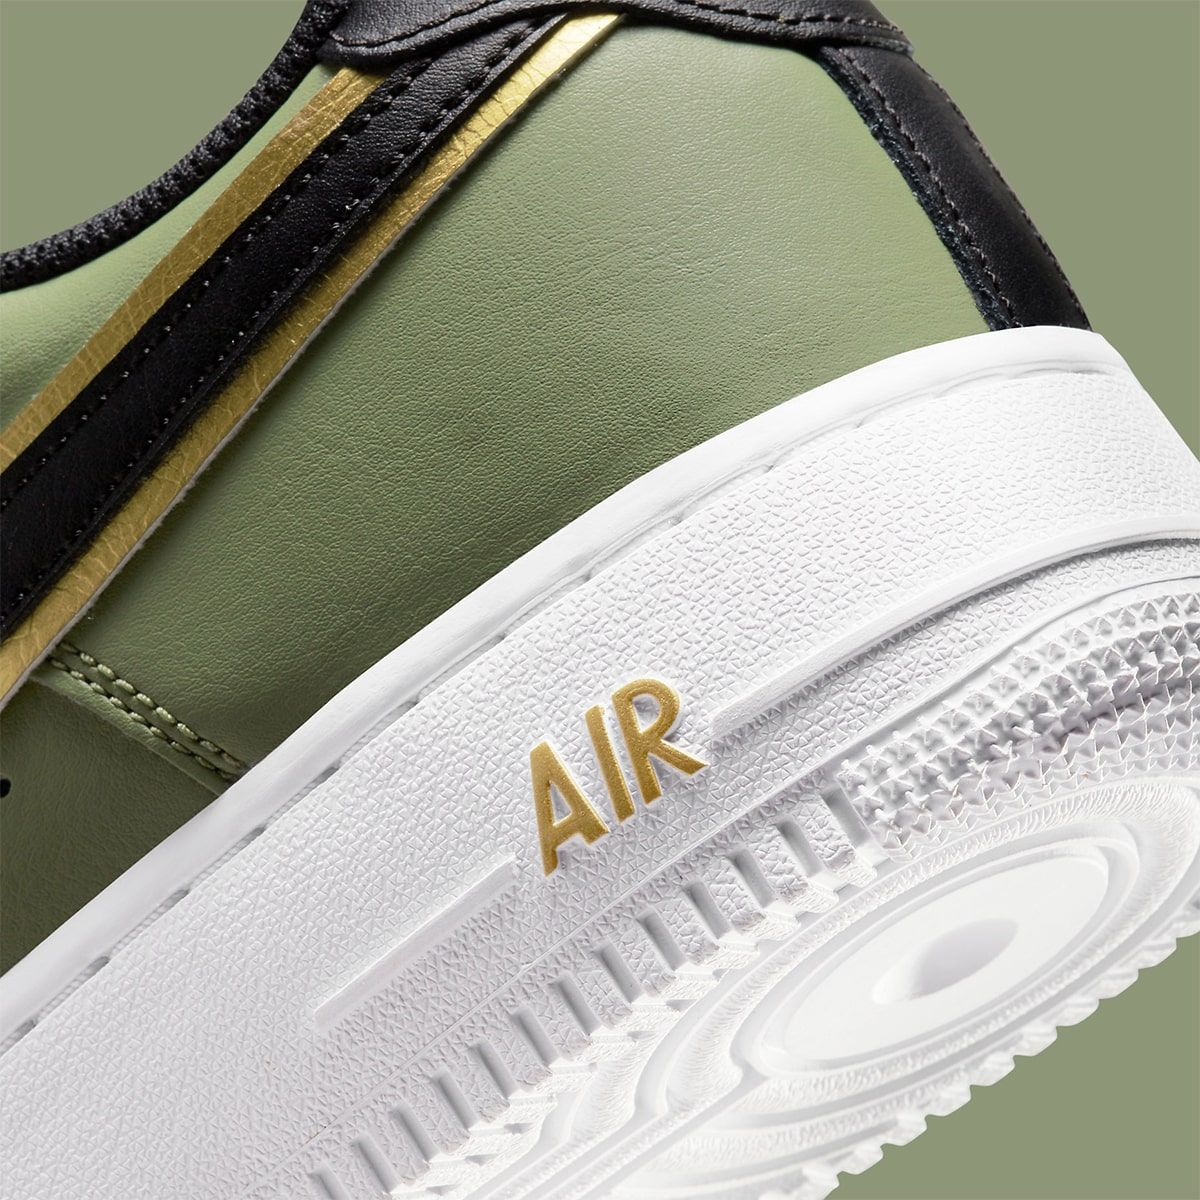 Buy Nike Air Force 1 Low '07 LV8 Double Swoosh Olive Gold Black DA8481-300